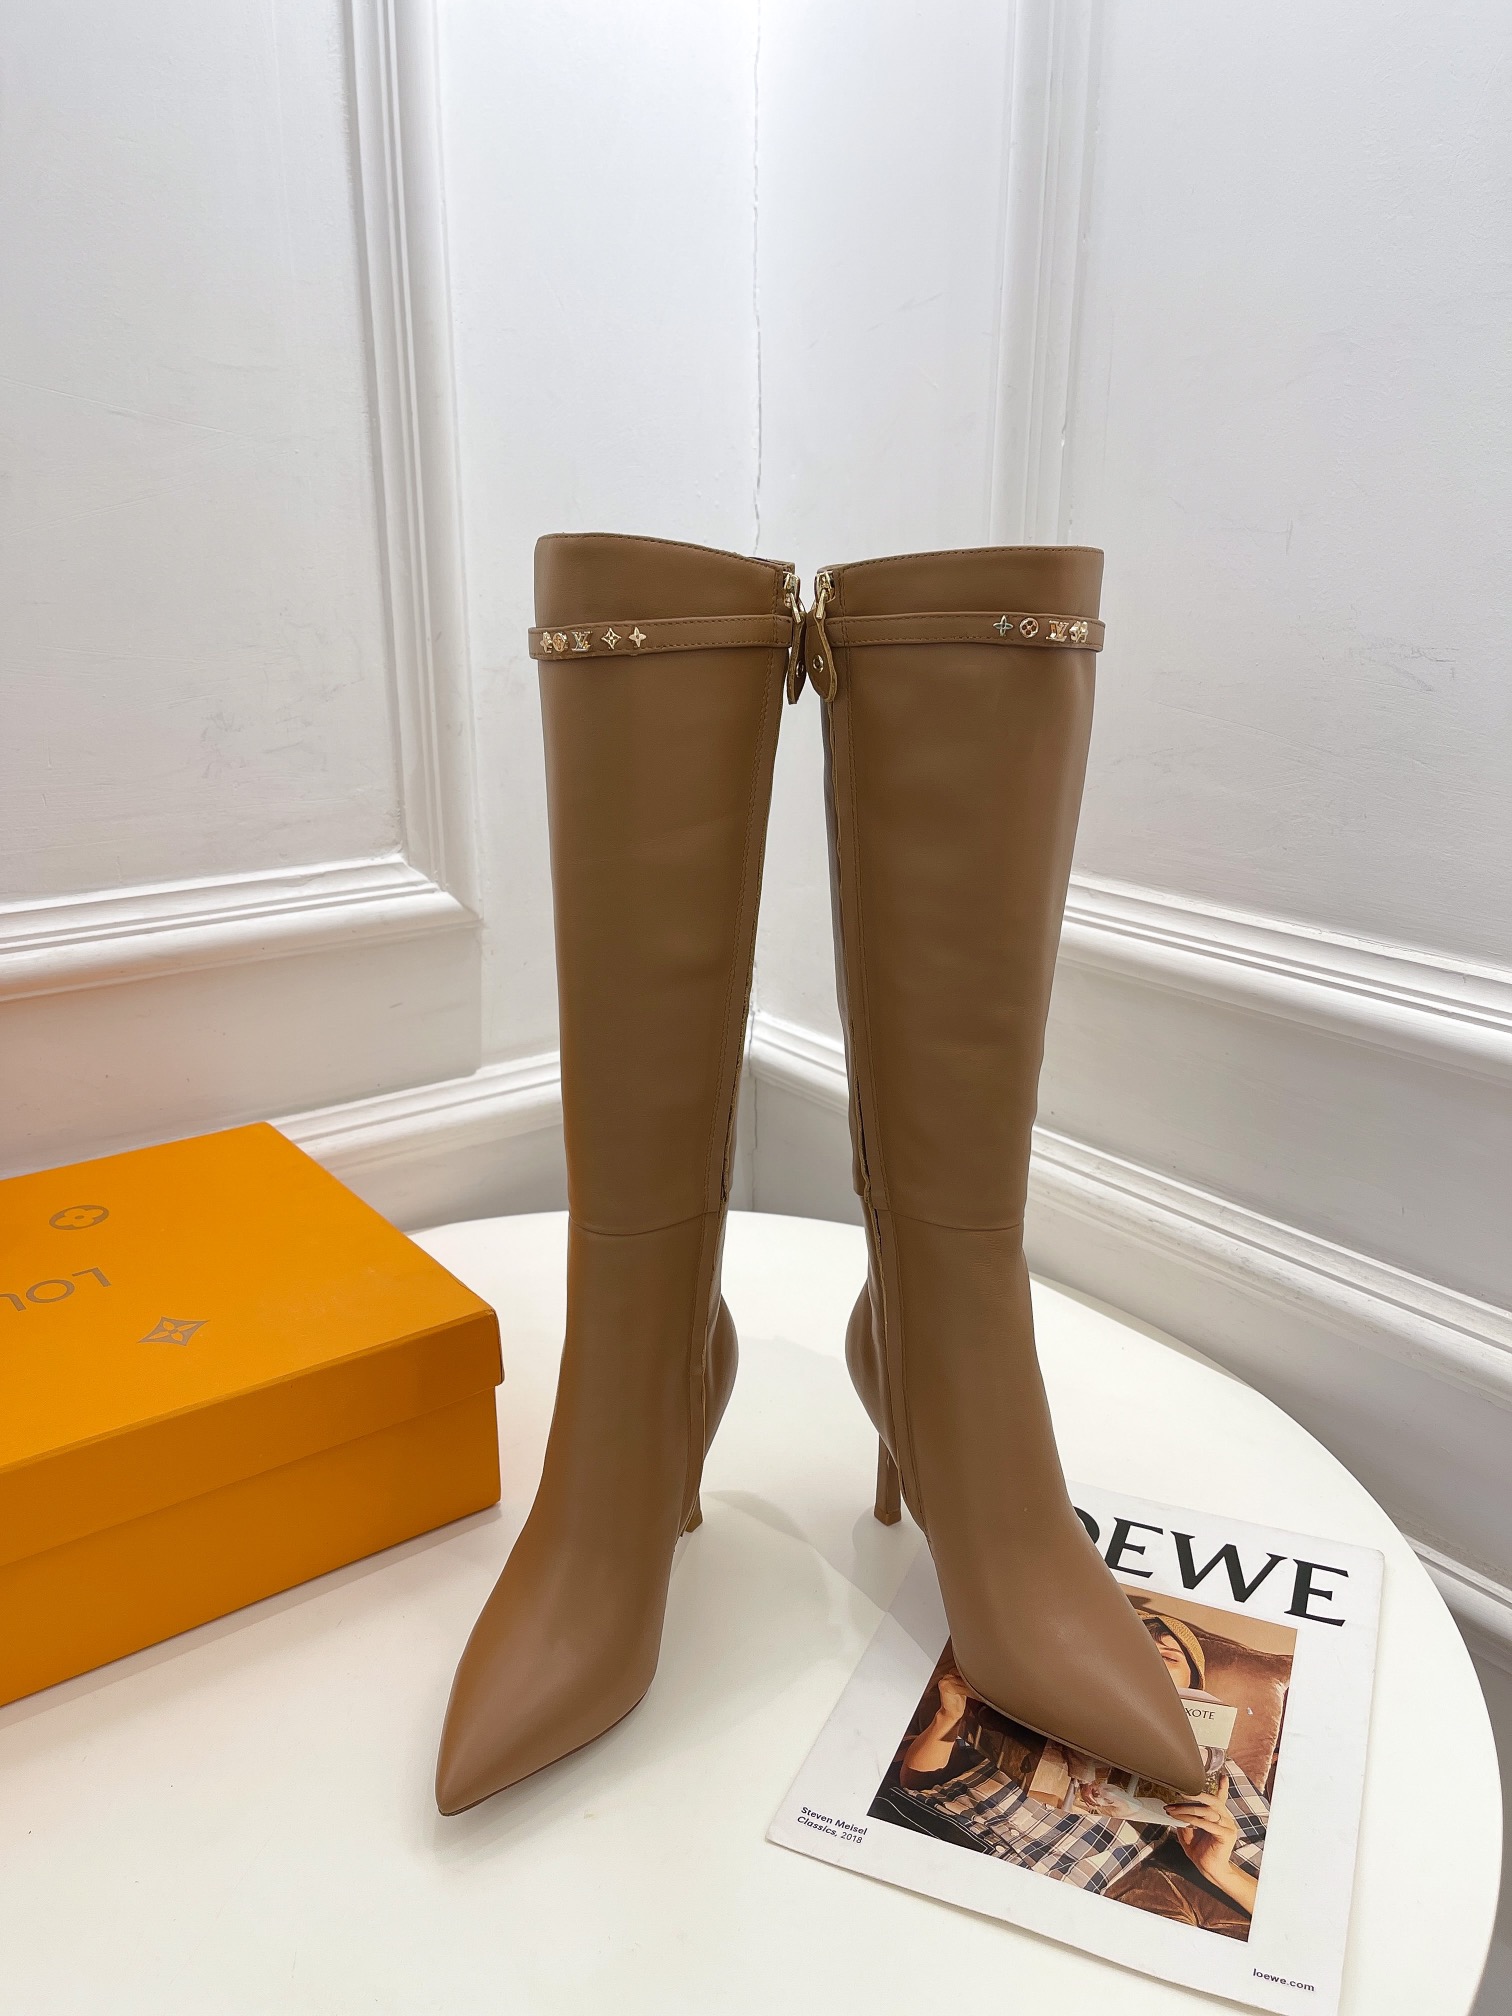 Louis Vuitton Long Boots Calfskin Cowhide Genuine Leather Sheepskin Fall/Winter Collection Vintage